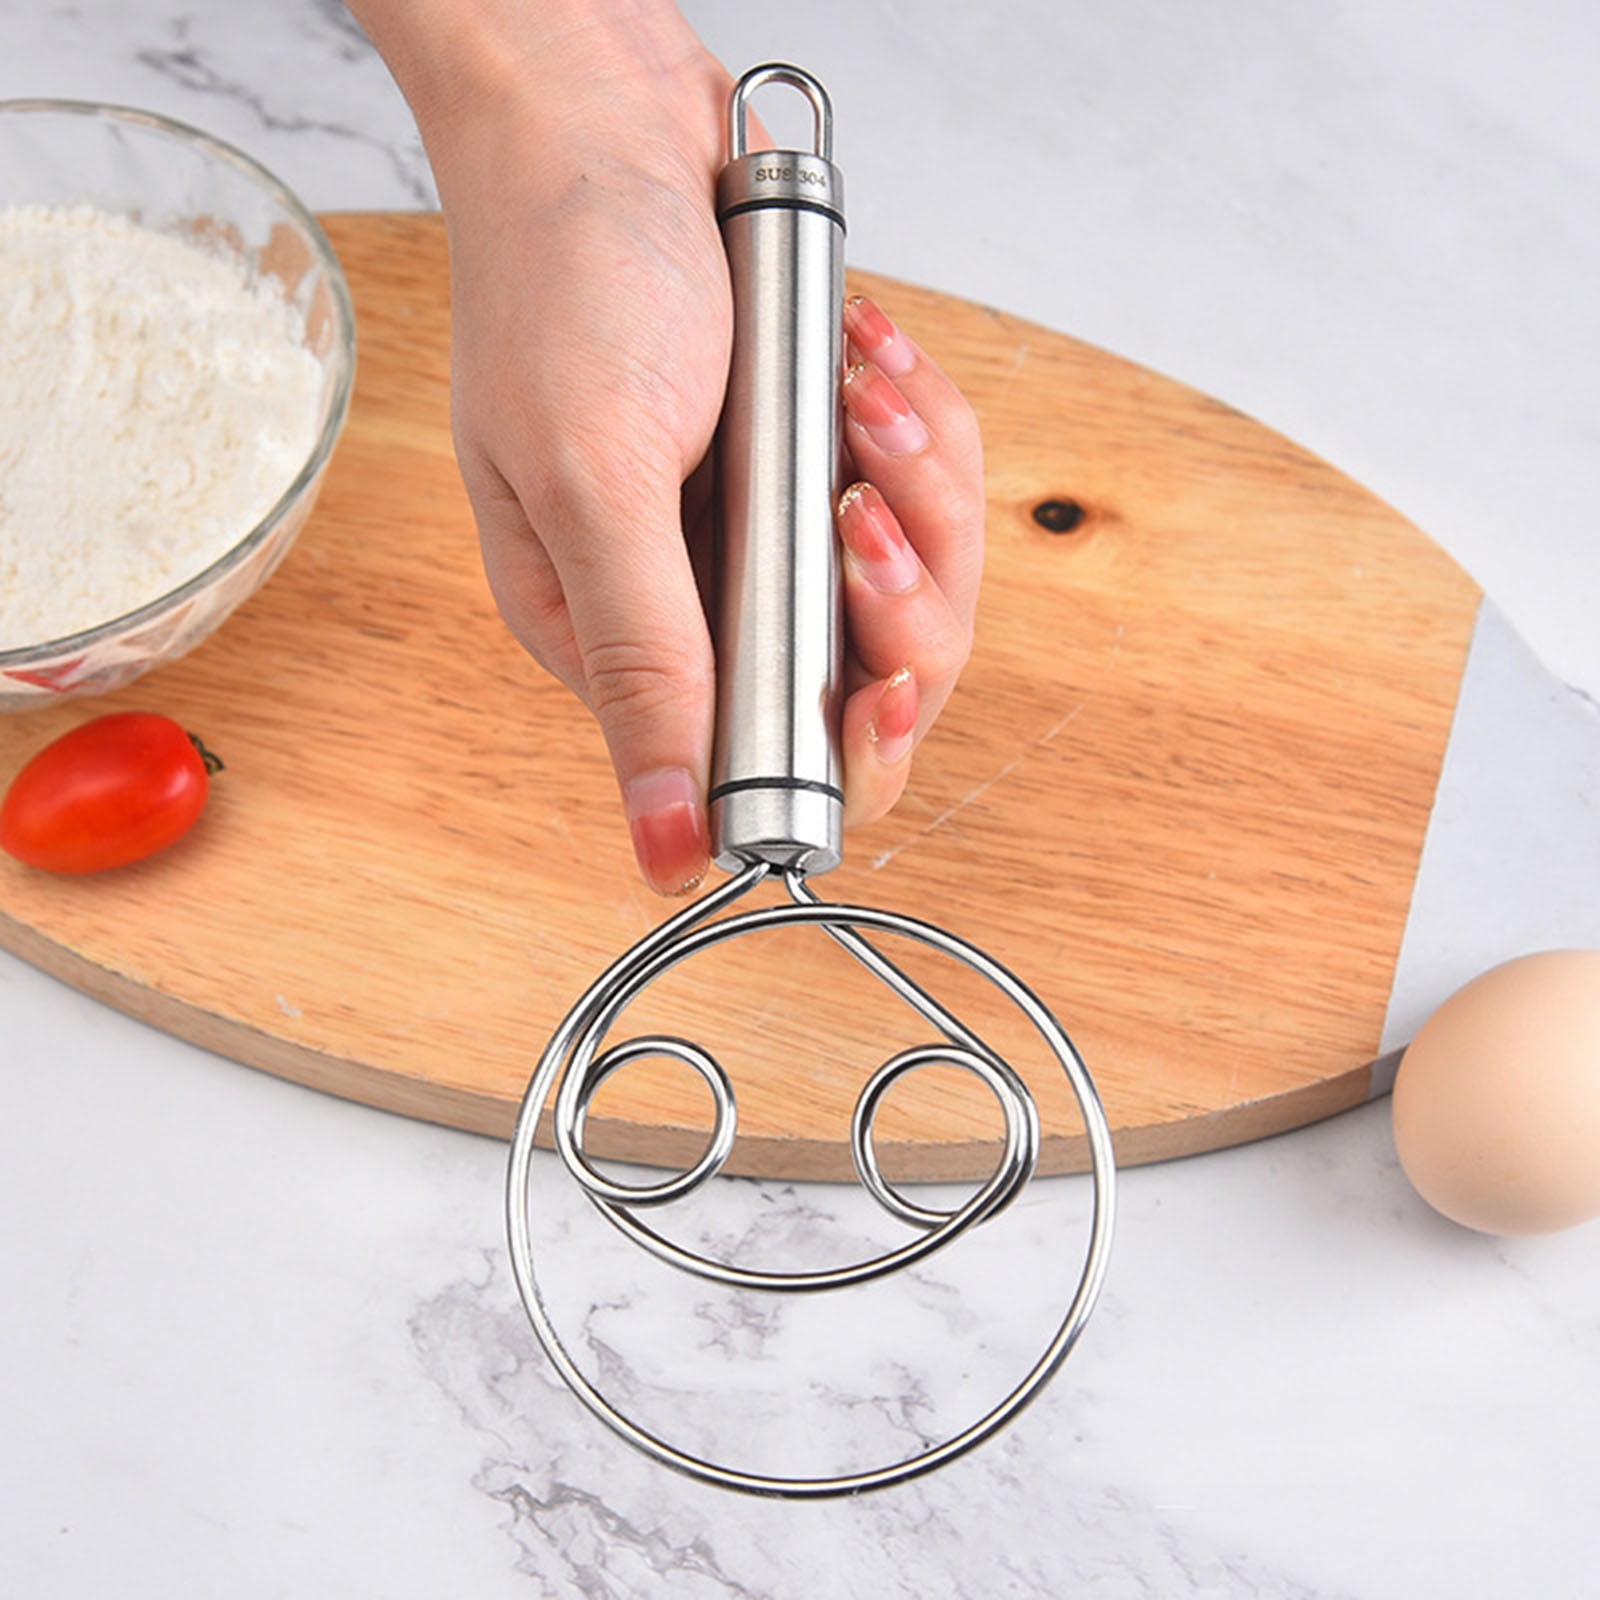 Wiueurtly Self Stirring Bread Baking Tool for Homemade Premium Dough Whisk for DIY Bread Cake Pizza, Size: One size, Silver